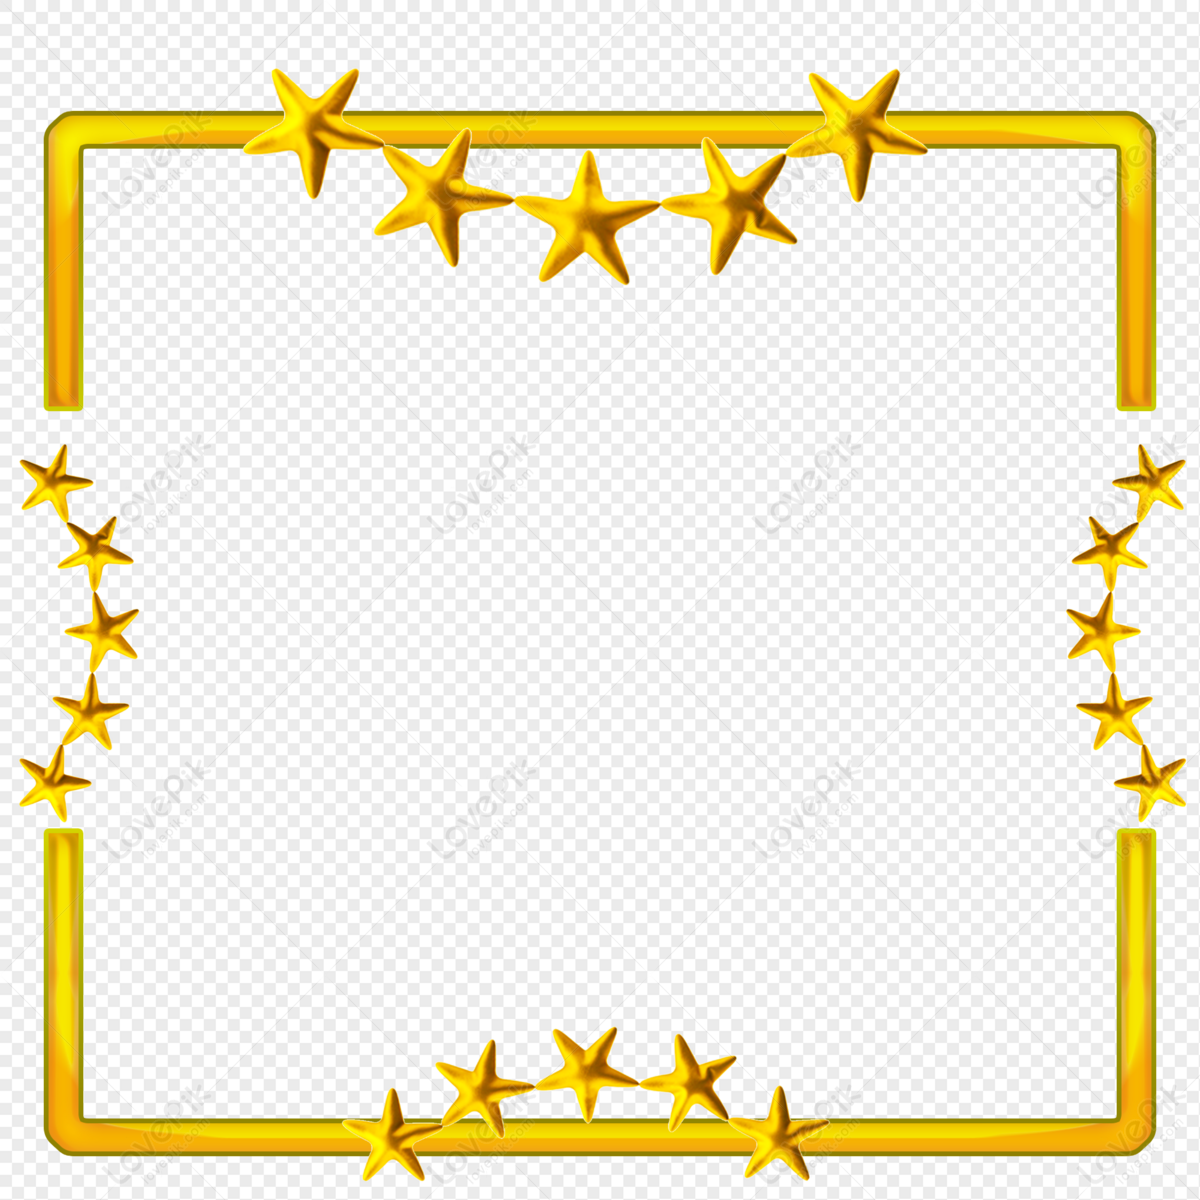 Yellow Star Border PNG Image and PSD File For Free - Lovepik | 401017462